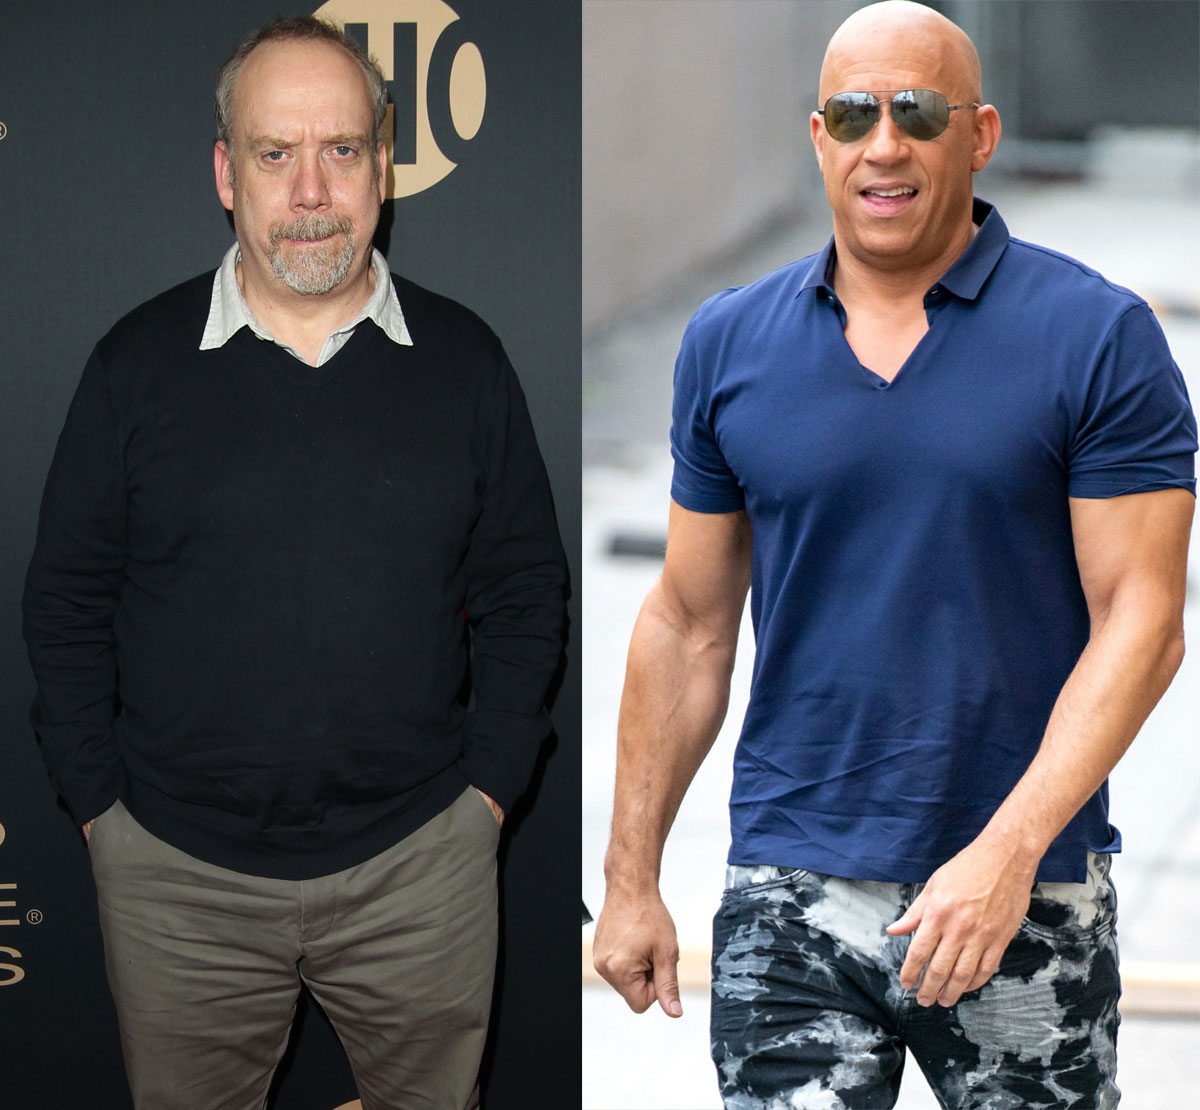 Paul Giamatti and Vin Diesel are the same age!